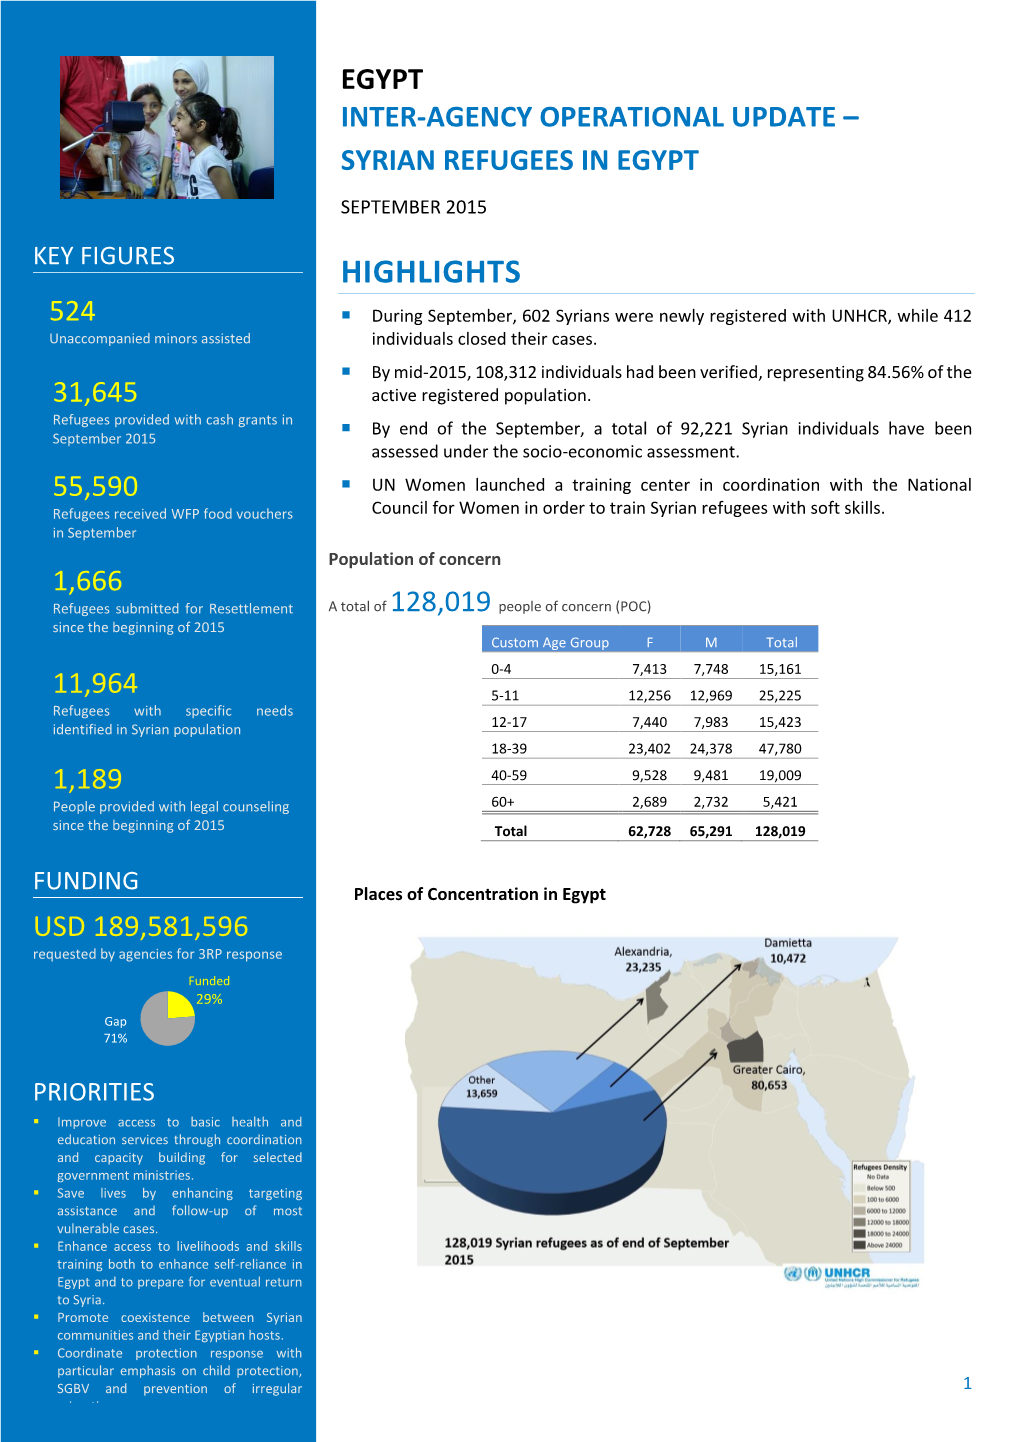 HIGHLIGHTS 524  During September, 602 Syrians Were Newly Registered with UNHCR, While 412 Unaccompanied Minors Assisted Individuals Closed Their Cases